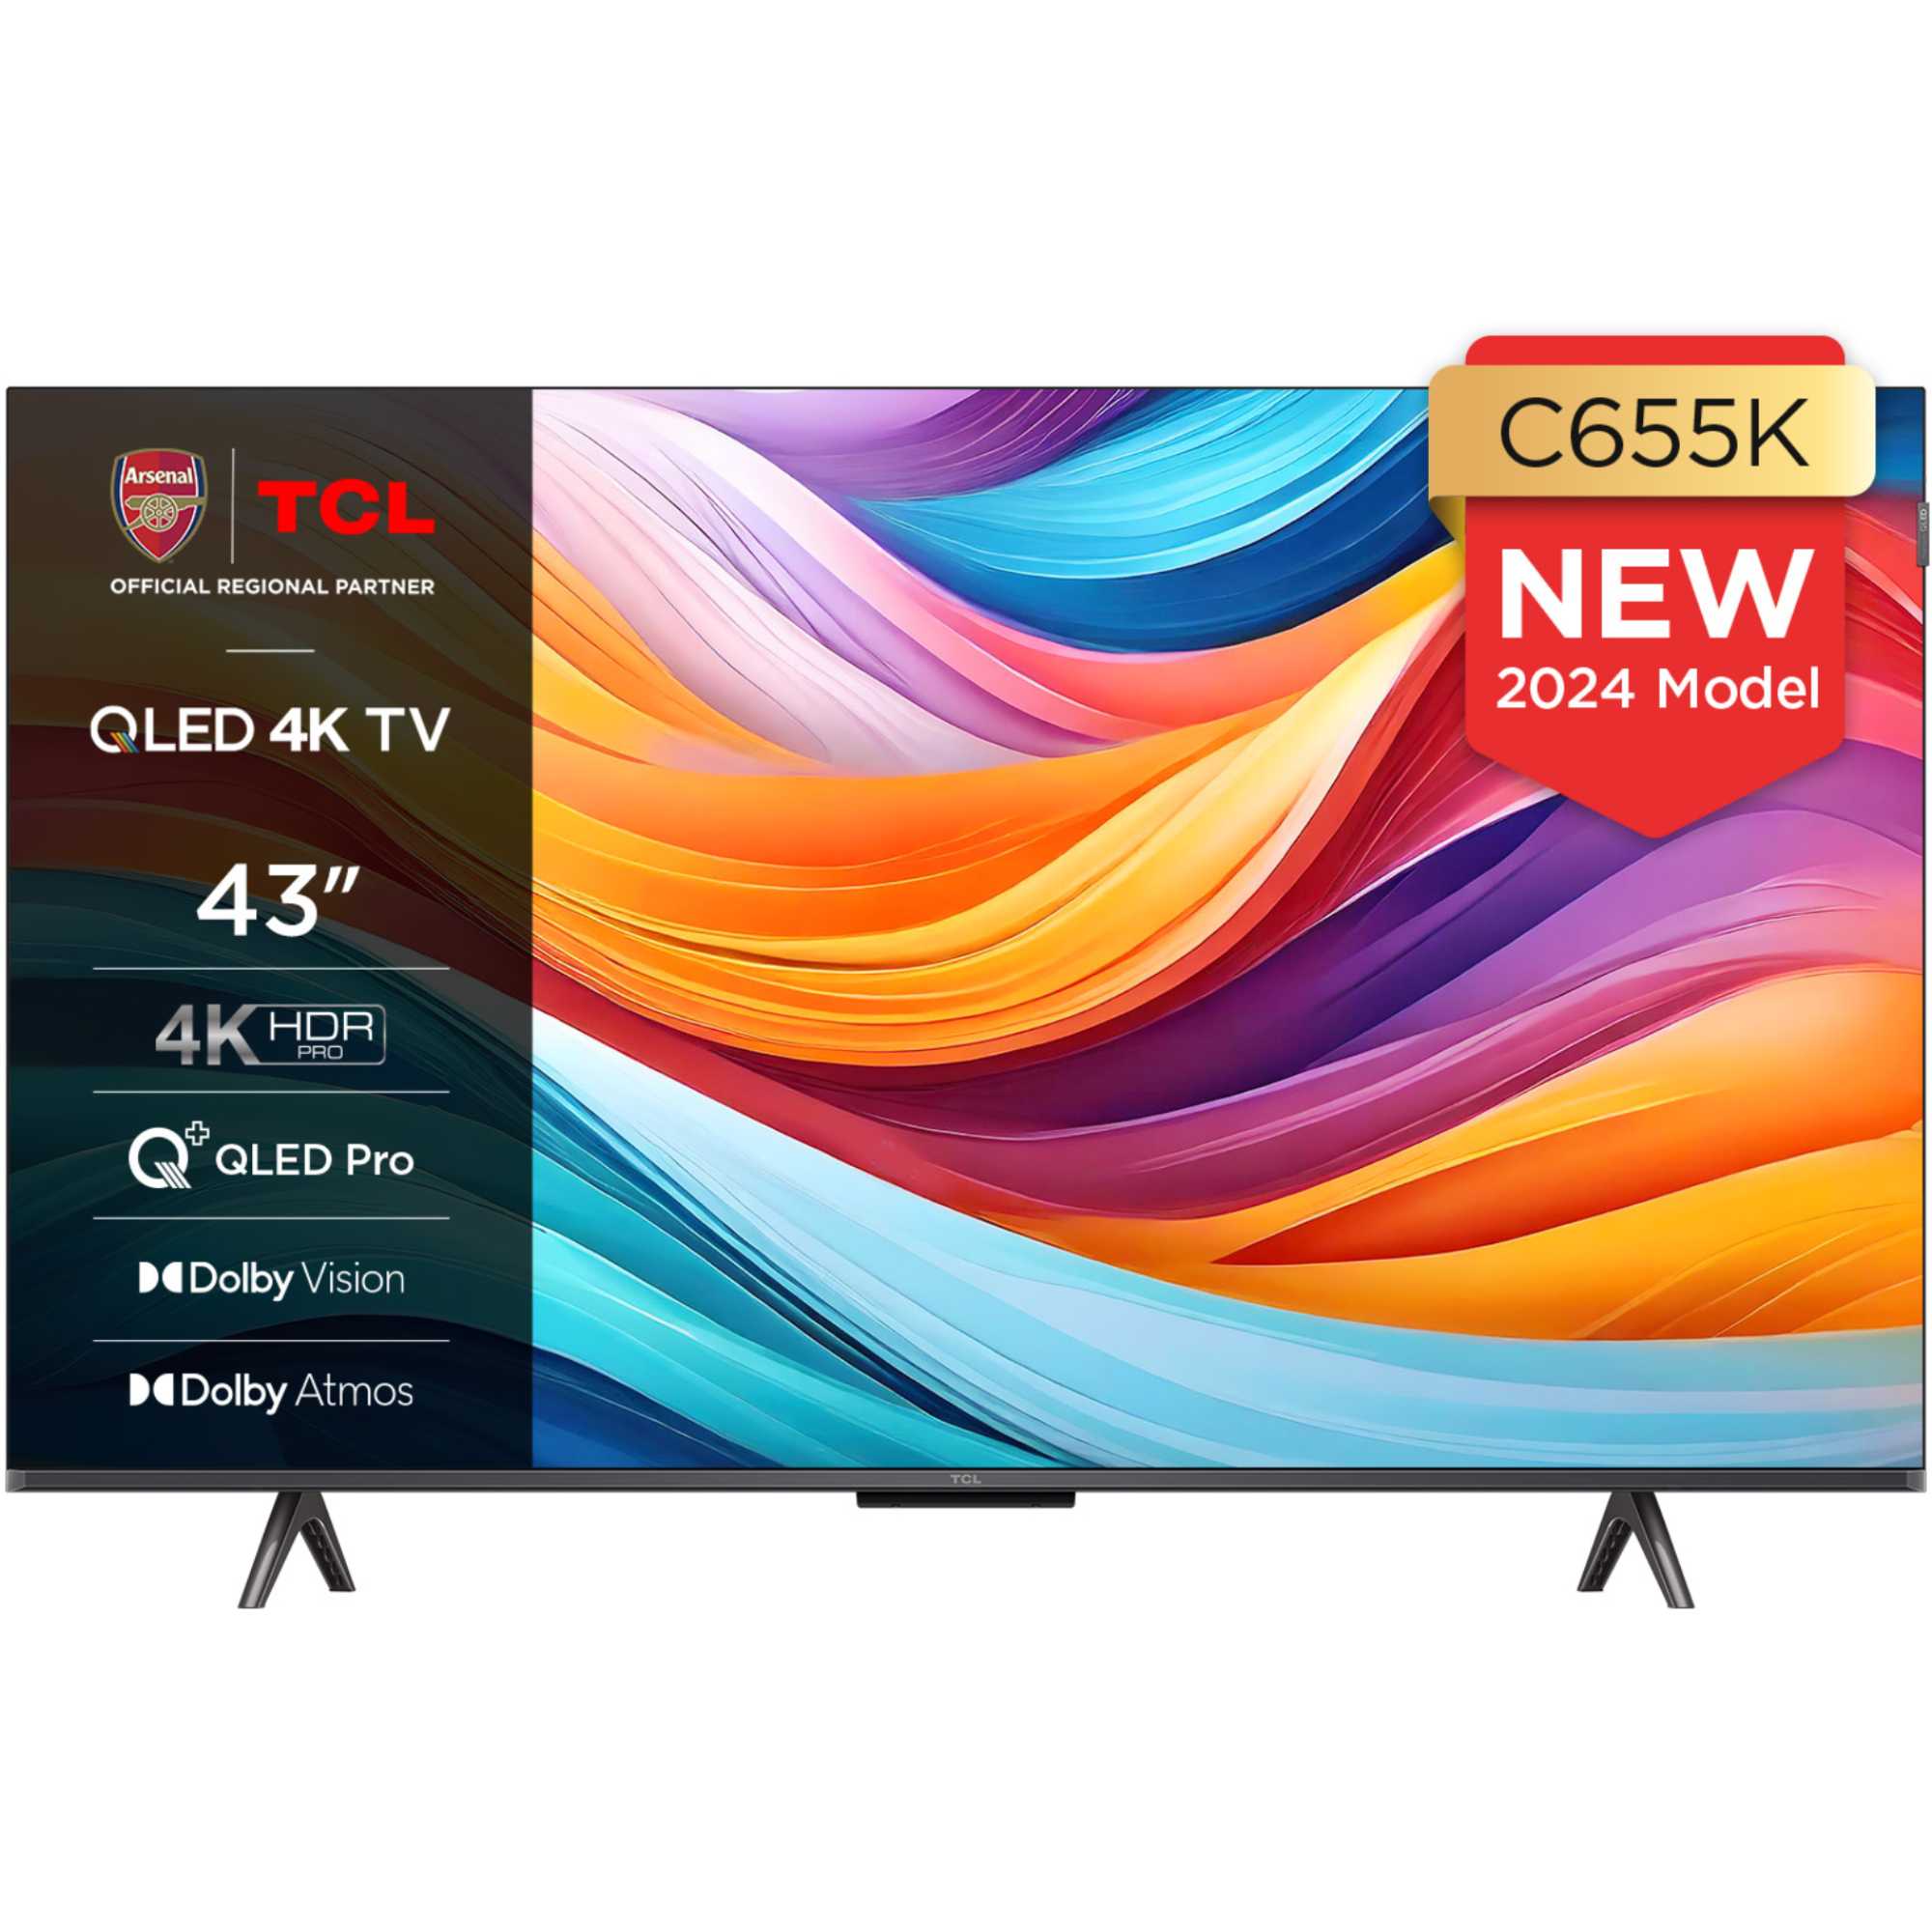 Image of TCL 43C655K